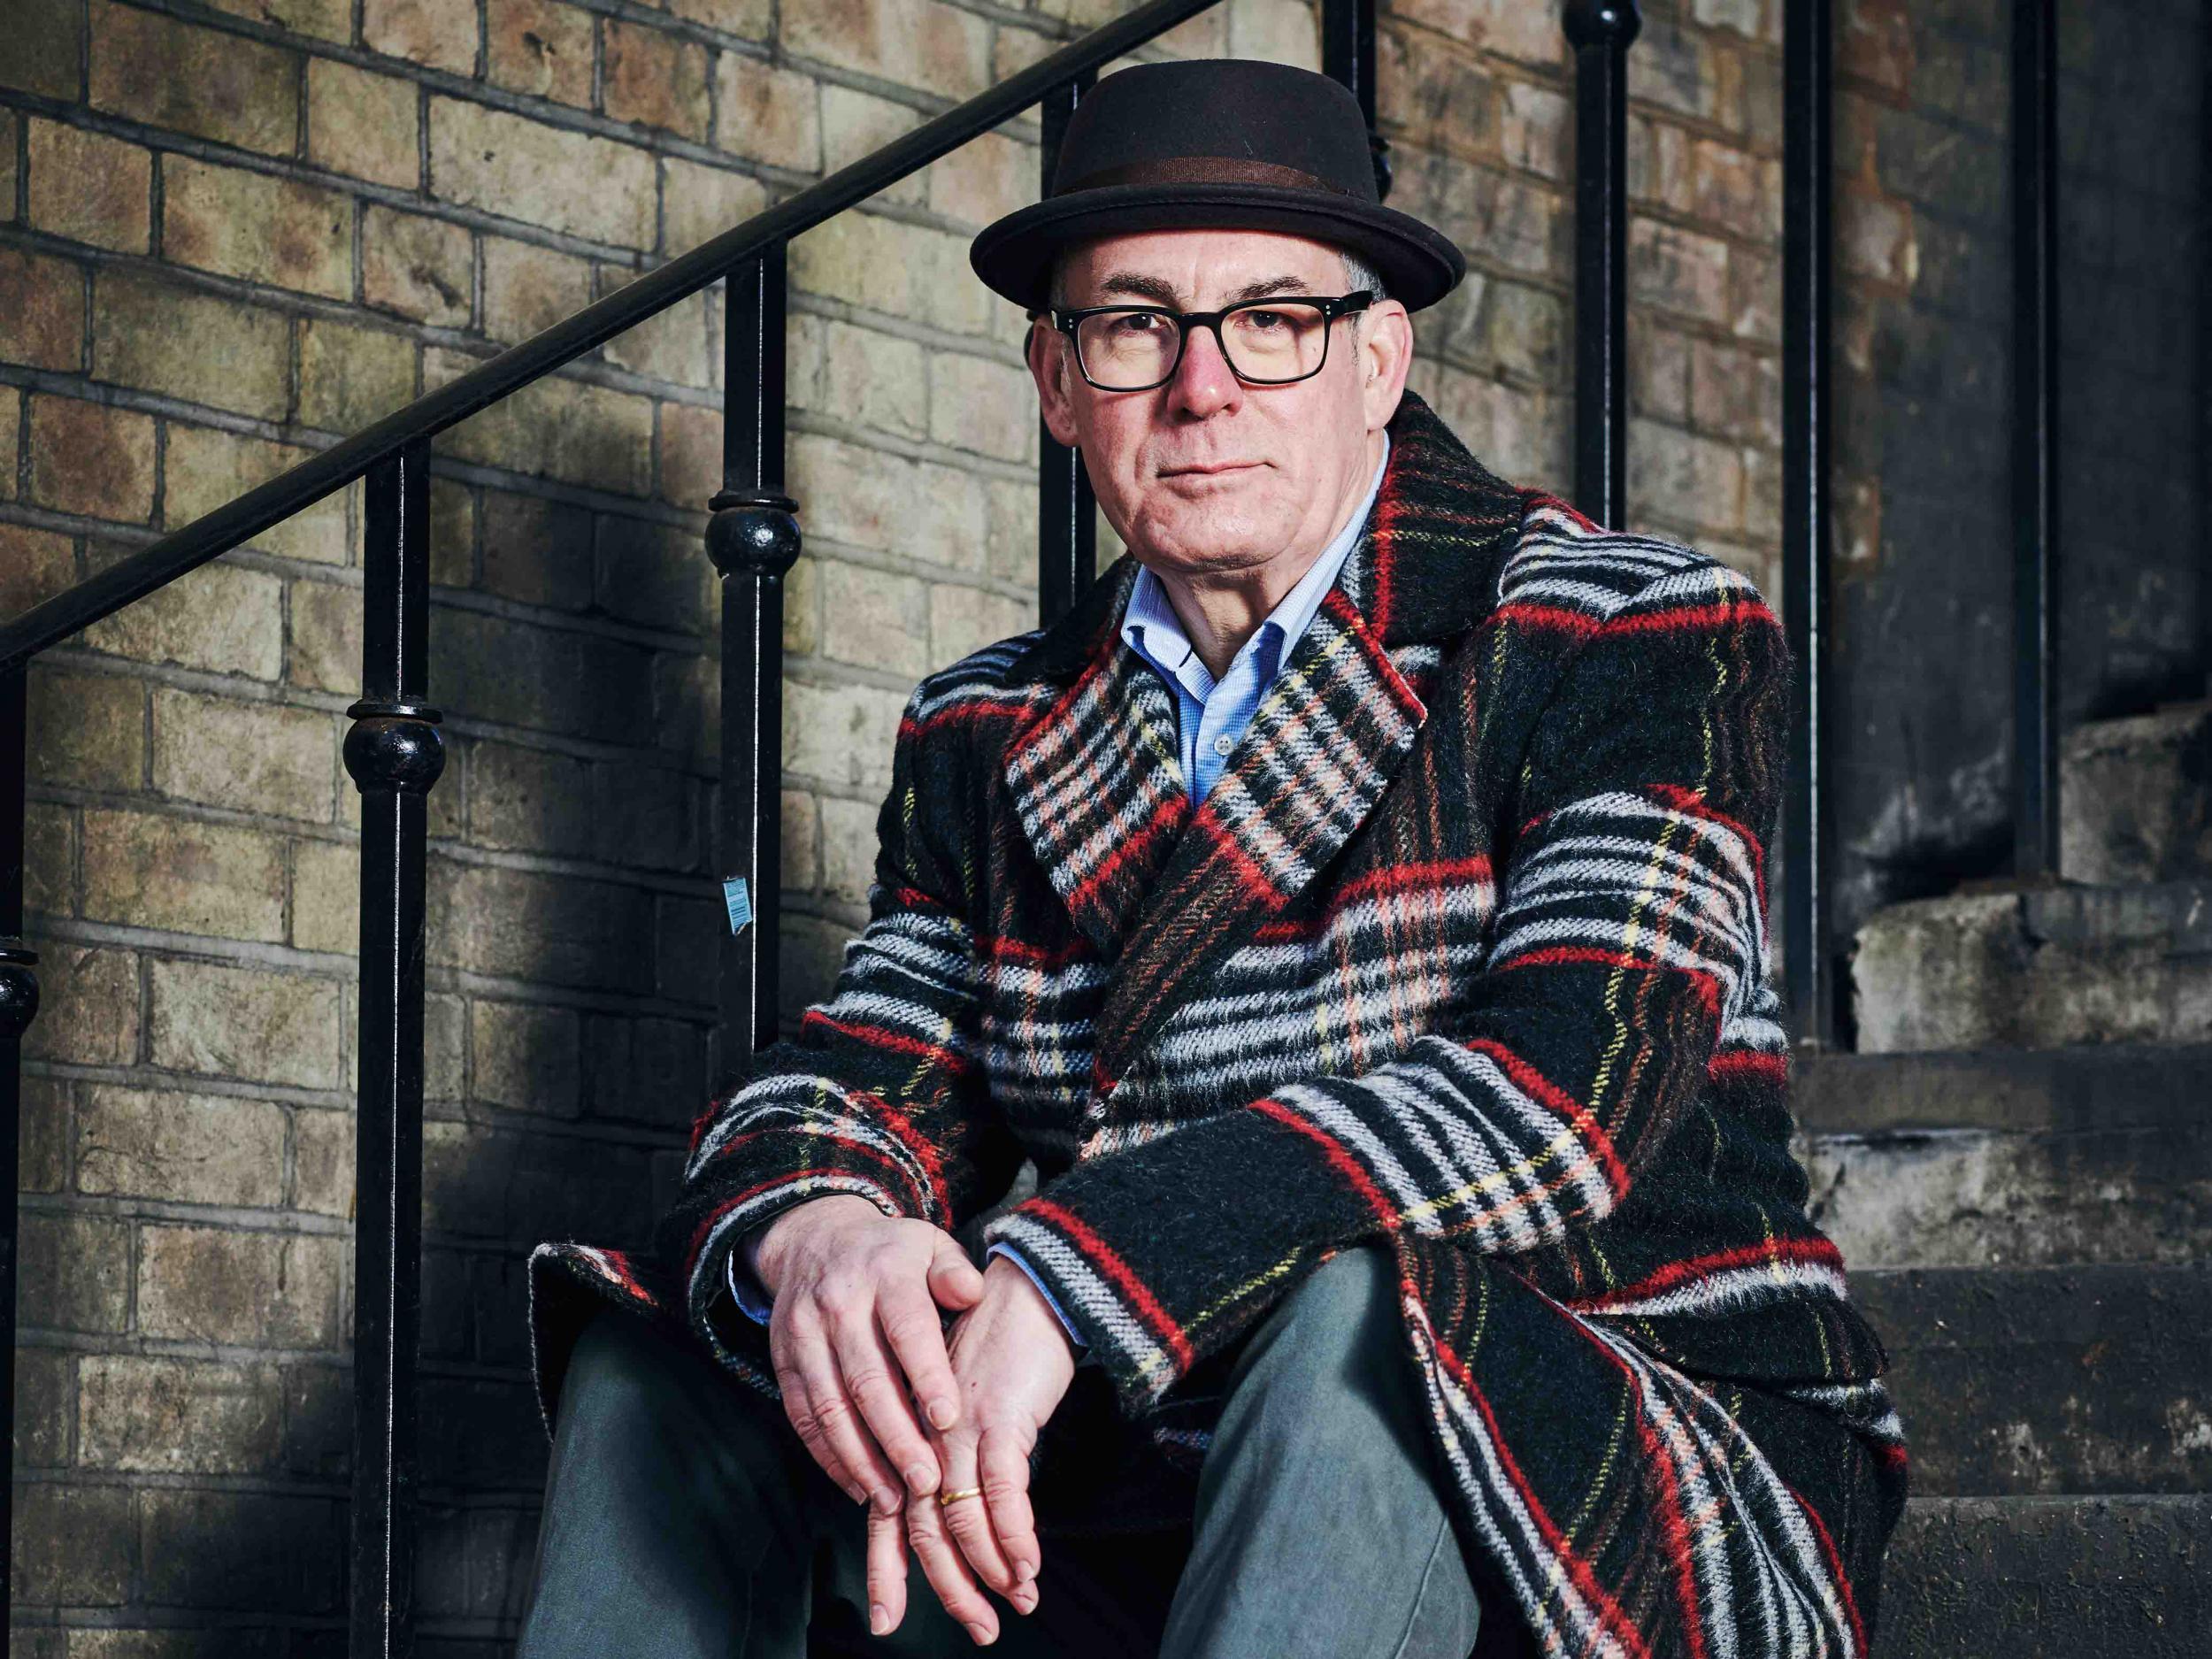 From radio to TV to writing, Quantick is a jack of all trades... and a master of all of them